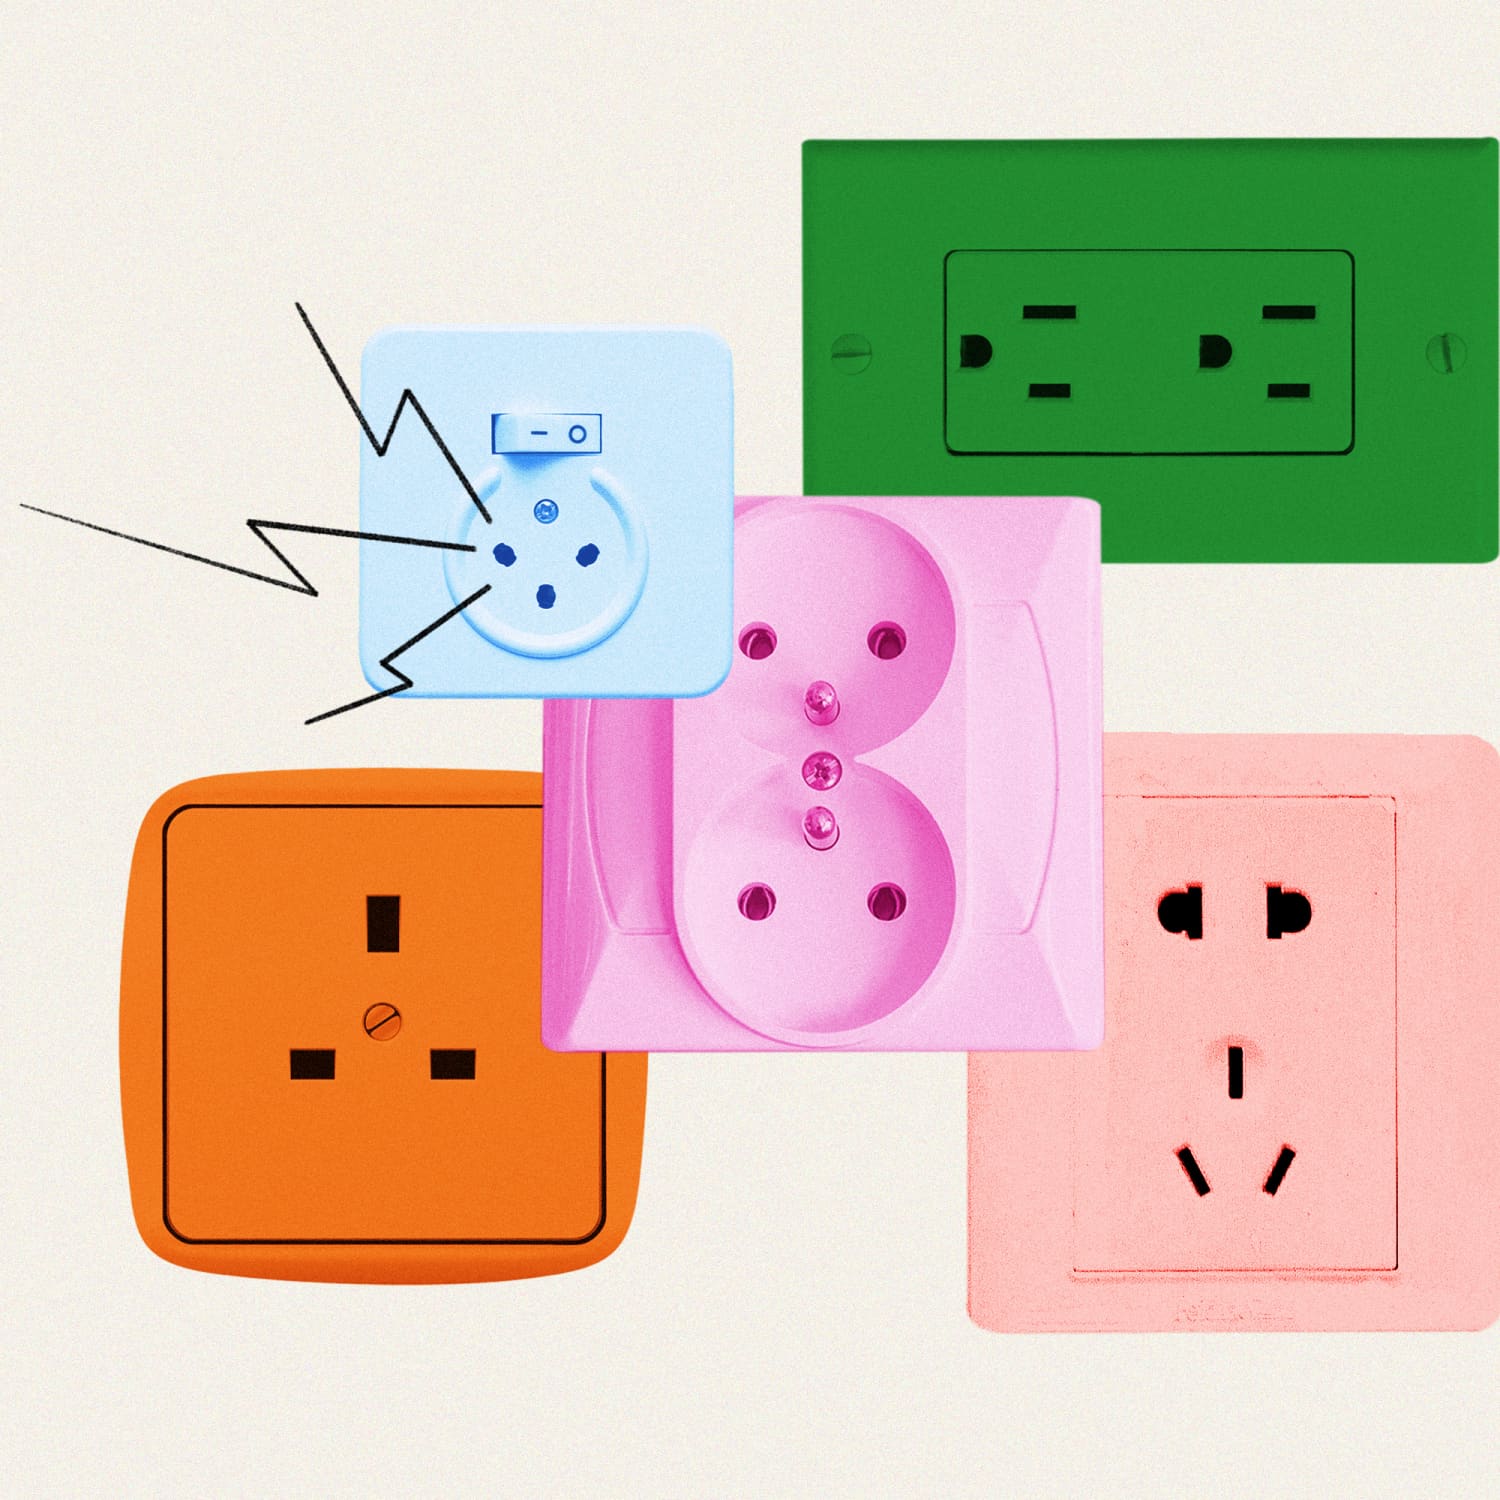 A Useful Guide to Outlet Types Around the World